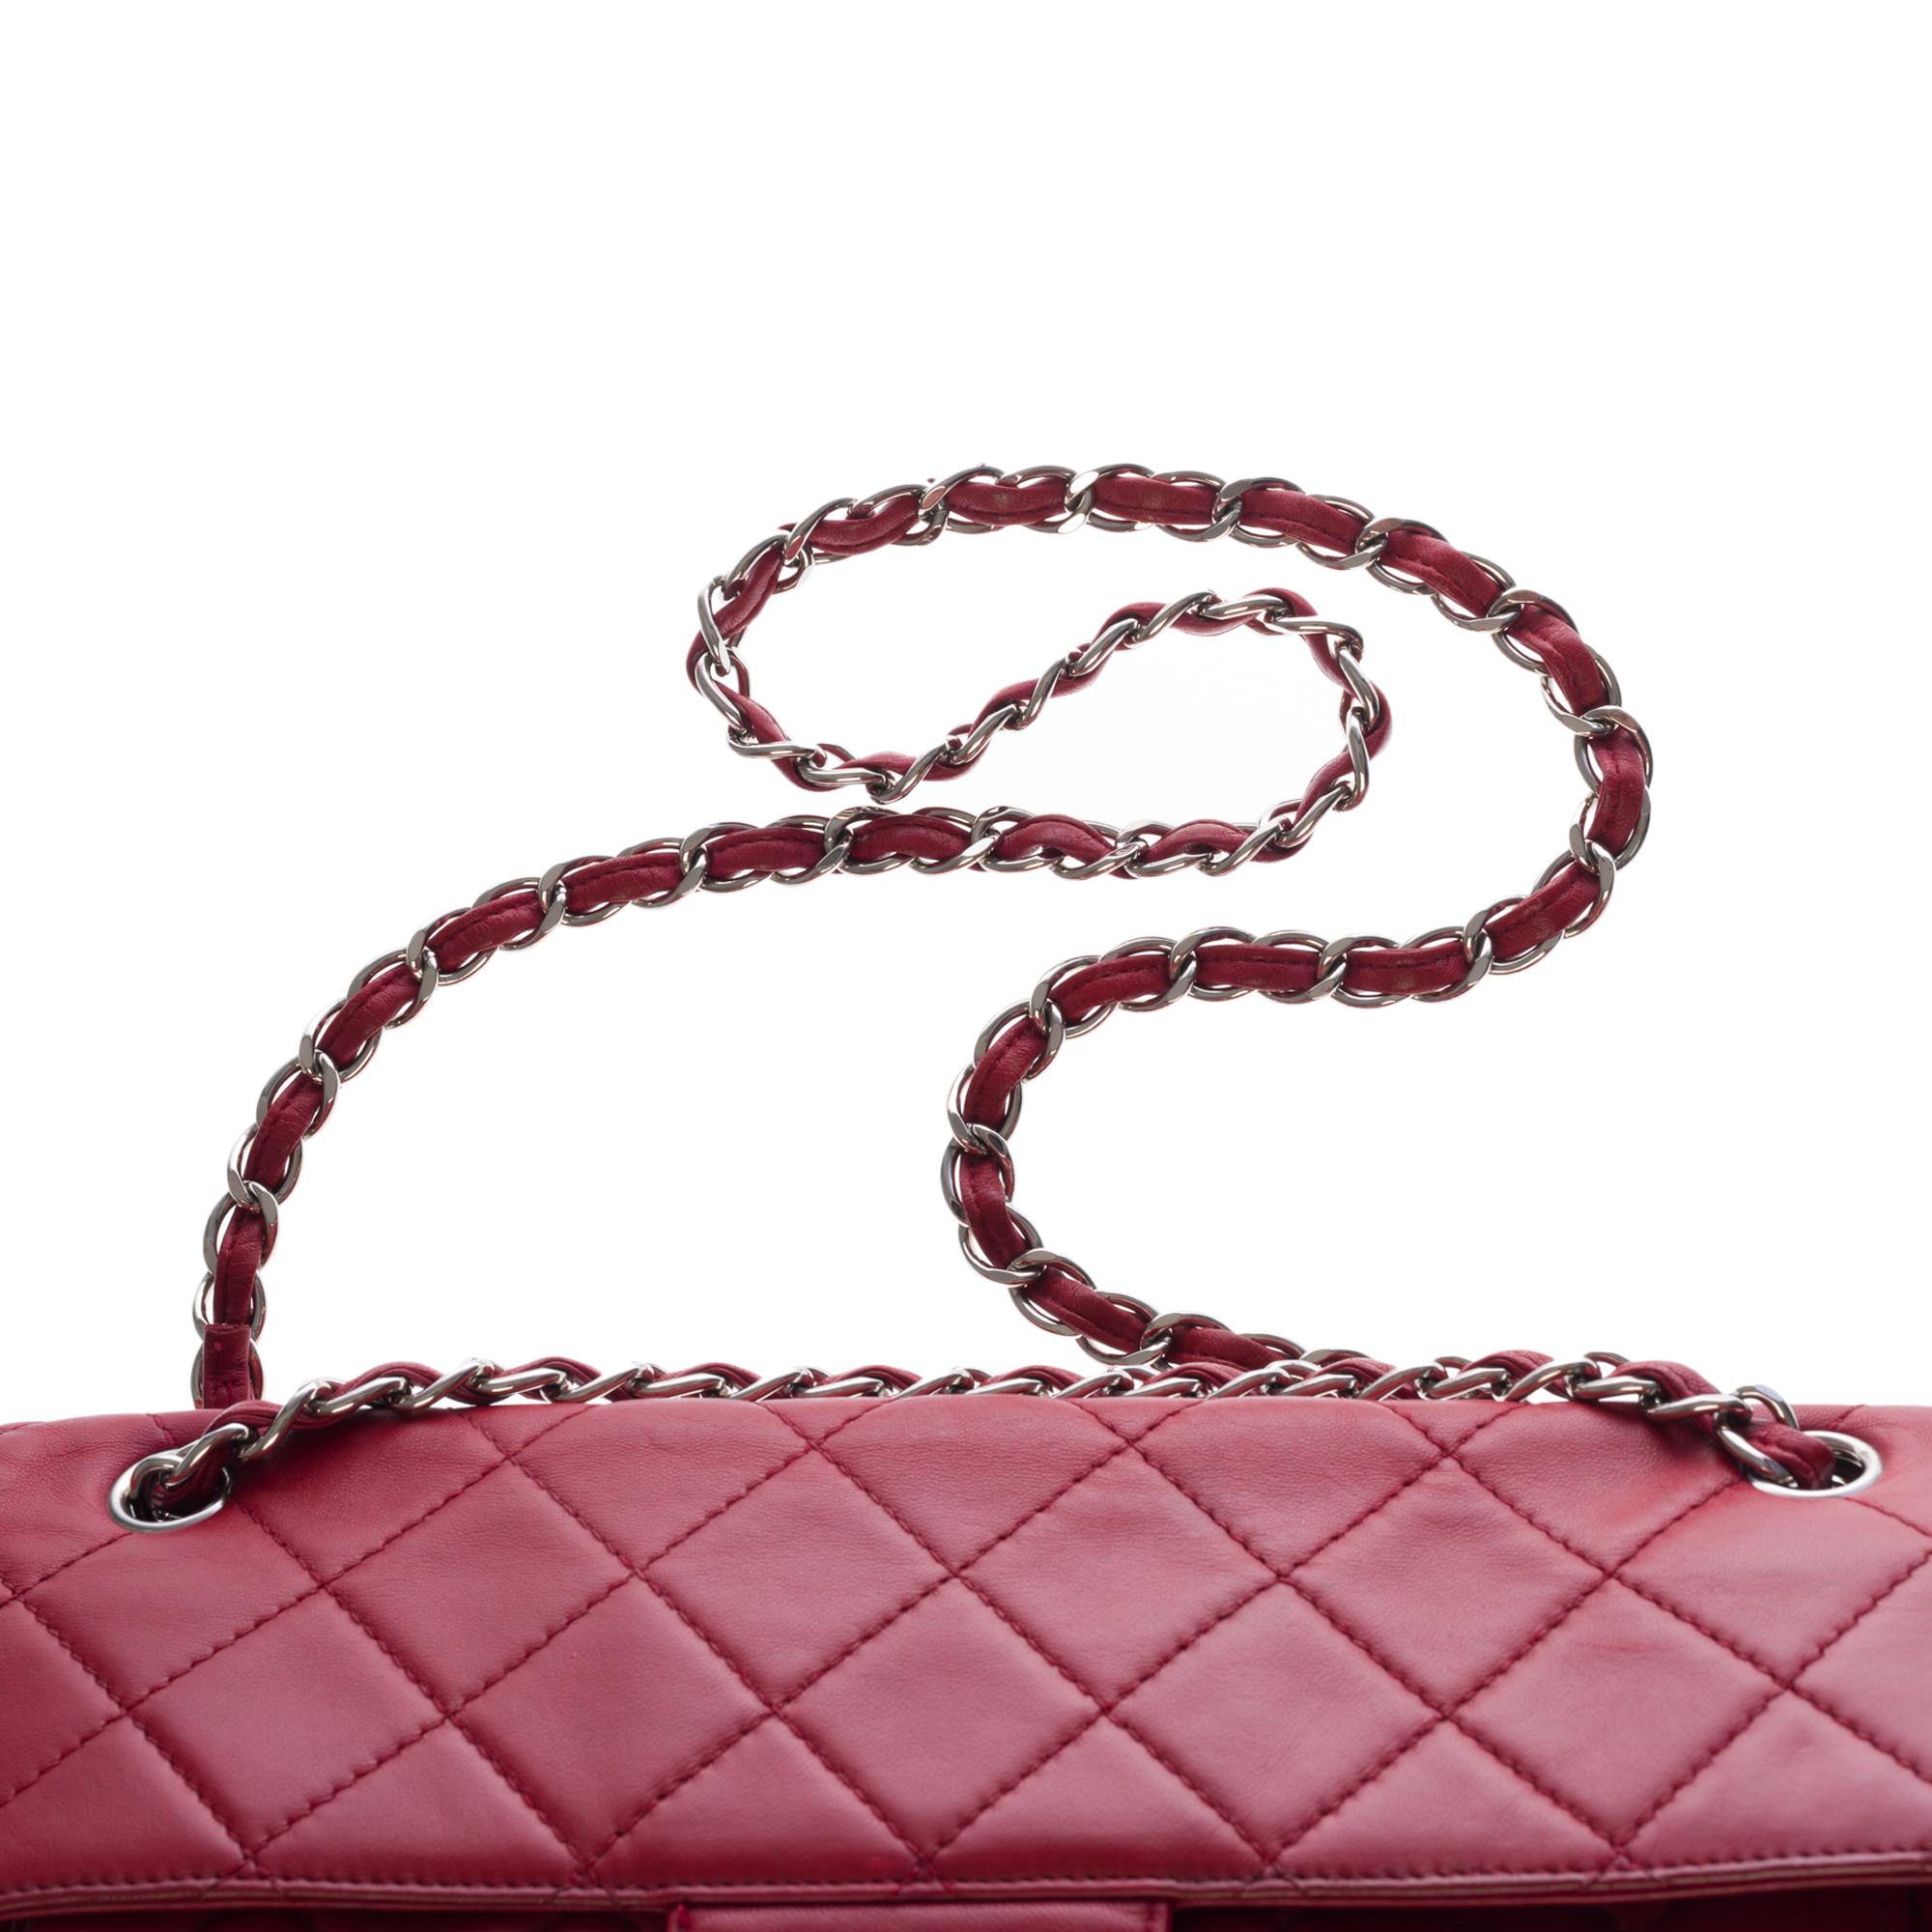 Chanel Classic 2.55 Maxi shoulder bag in red quilted leather, SHW 1